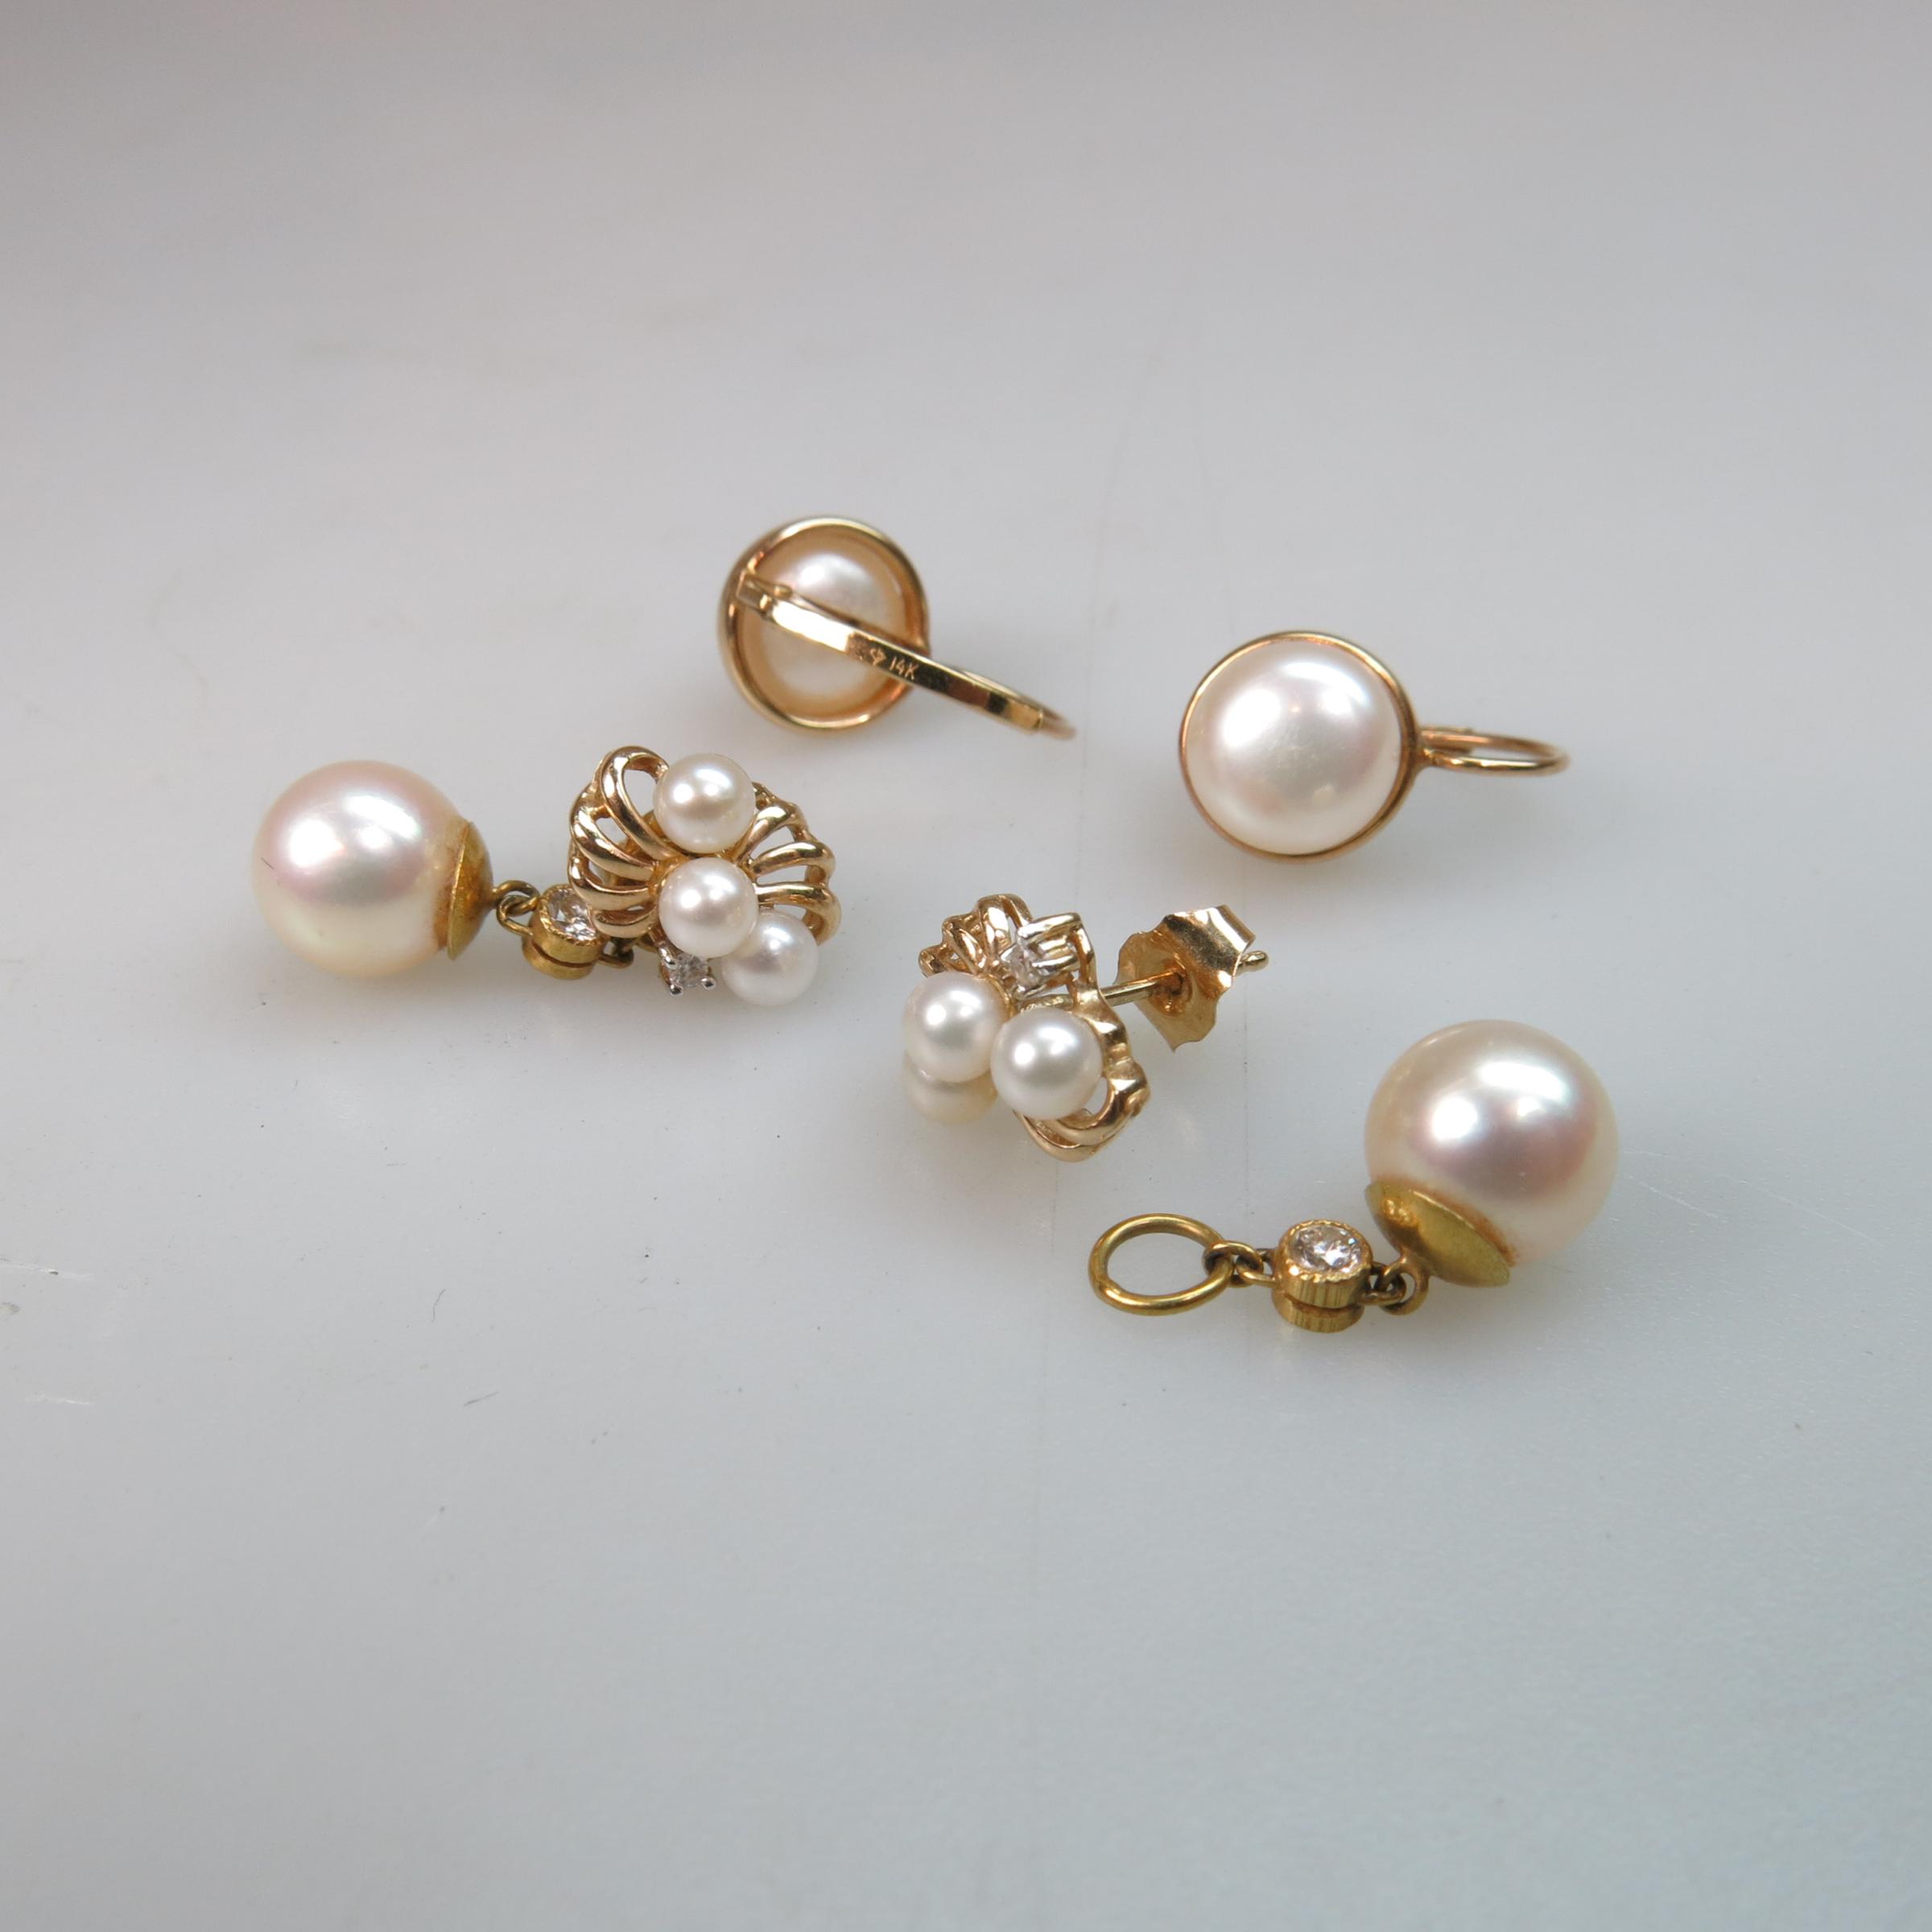 2 Pairs Of 14k Yellow Gold And Pearl Earrings